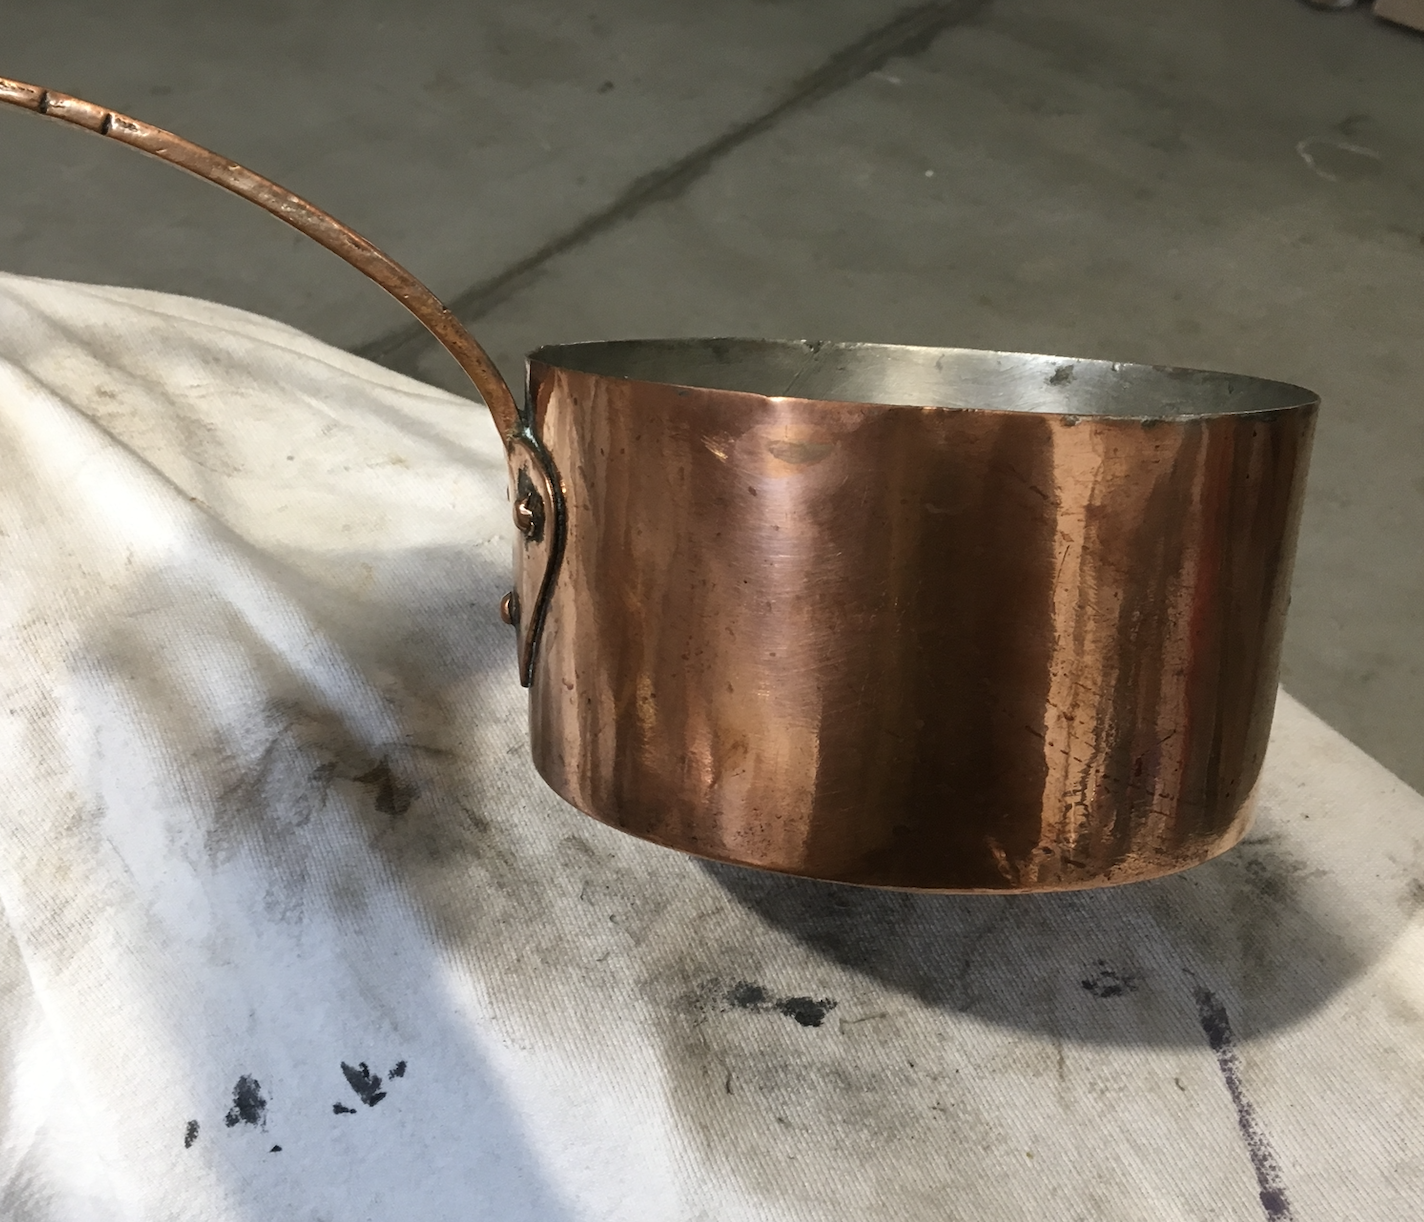 copper pot, tinlined copper, tinlined copper cookware, copper cookware, how to clean copper, how to clean copper cookware, american copper, american copper cookware, made in america